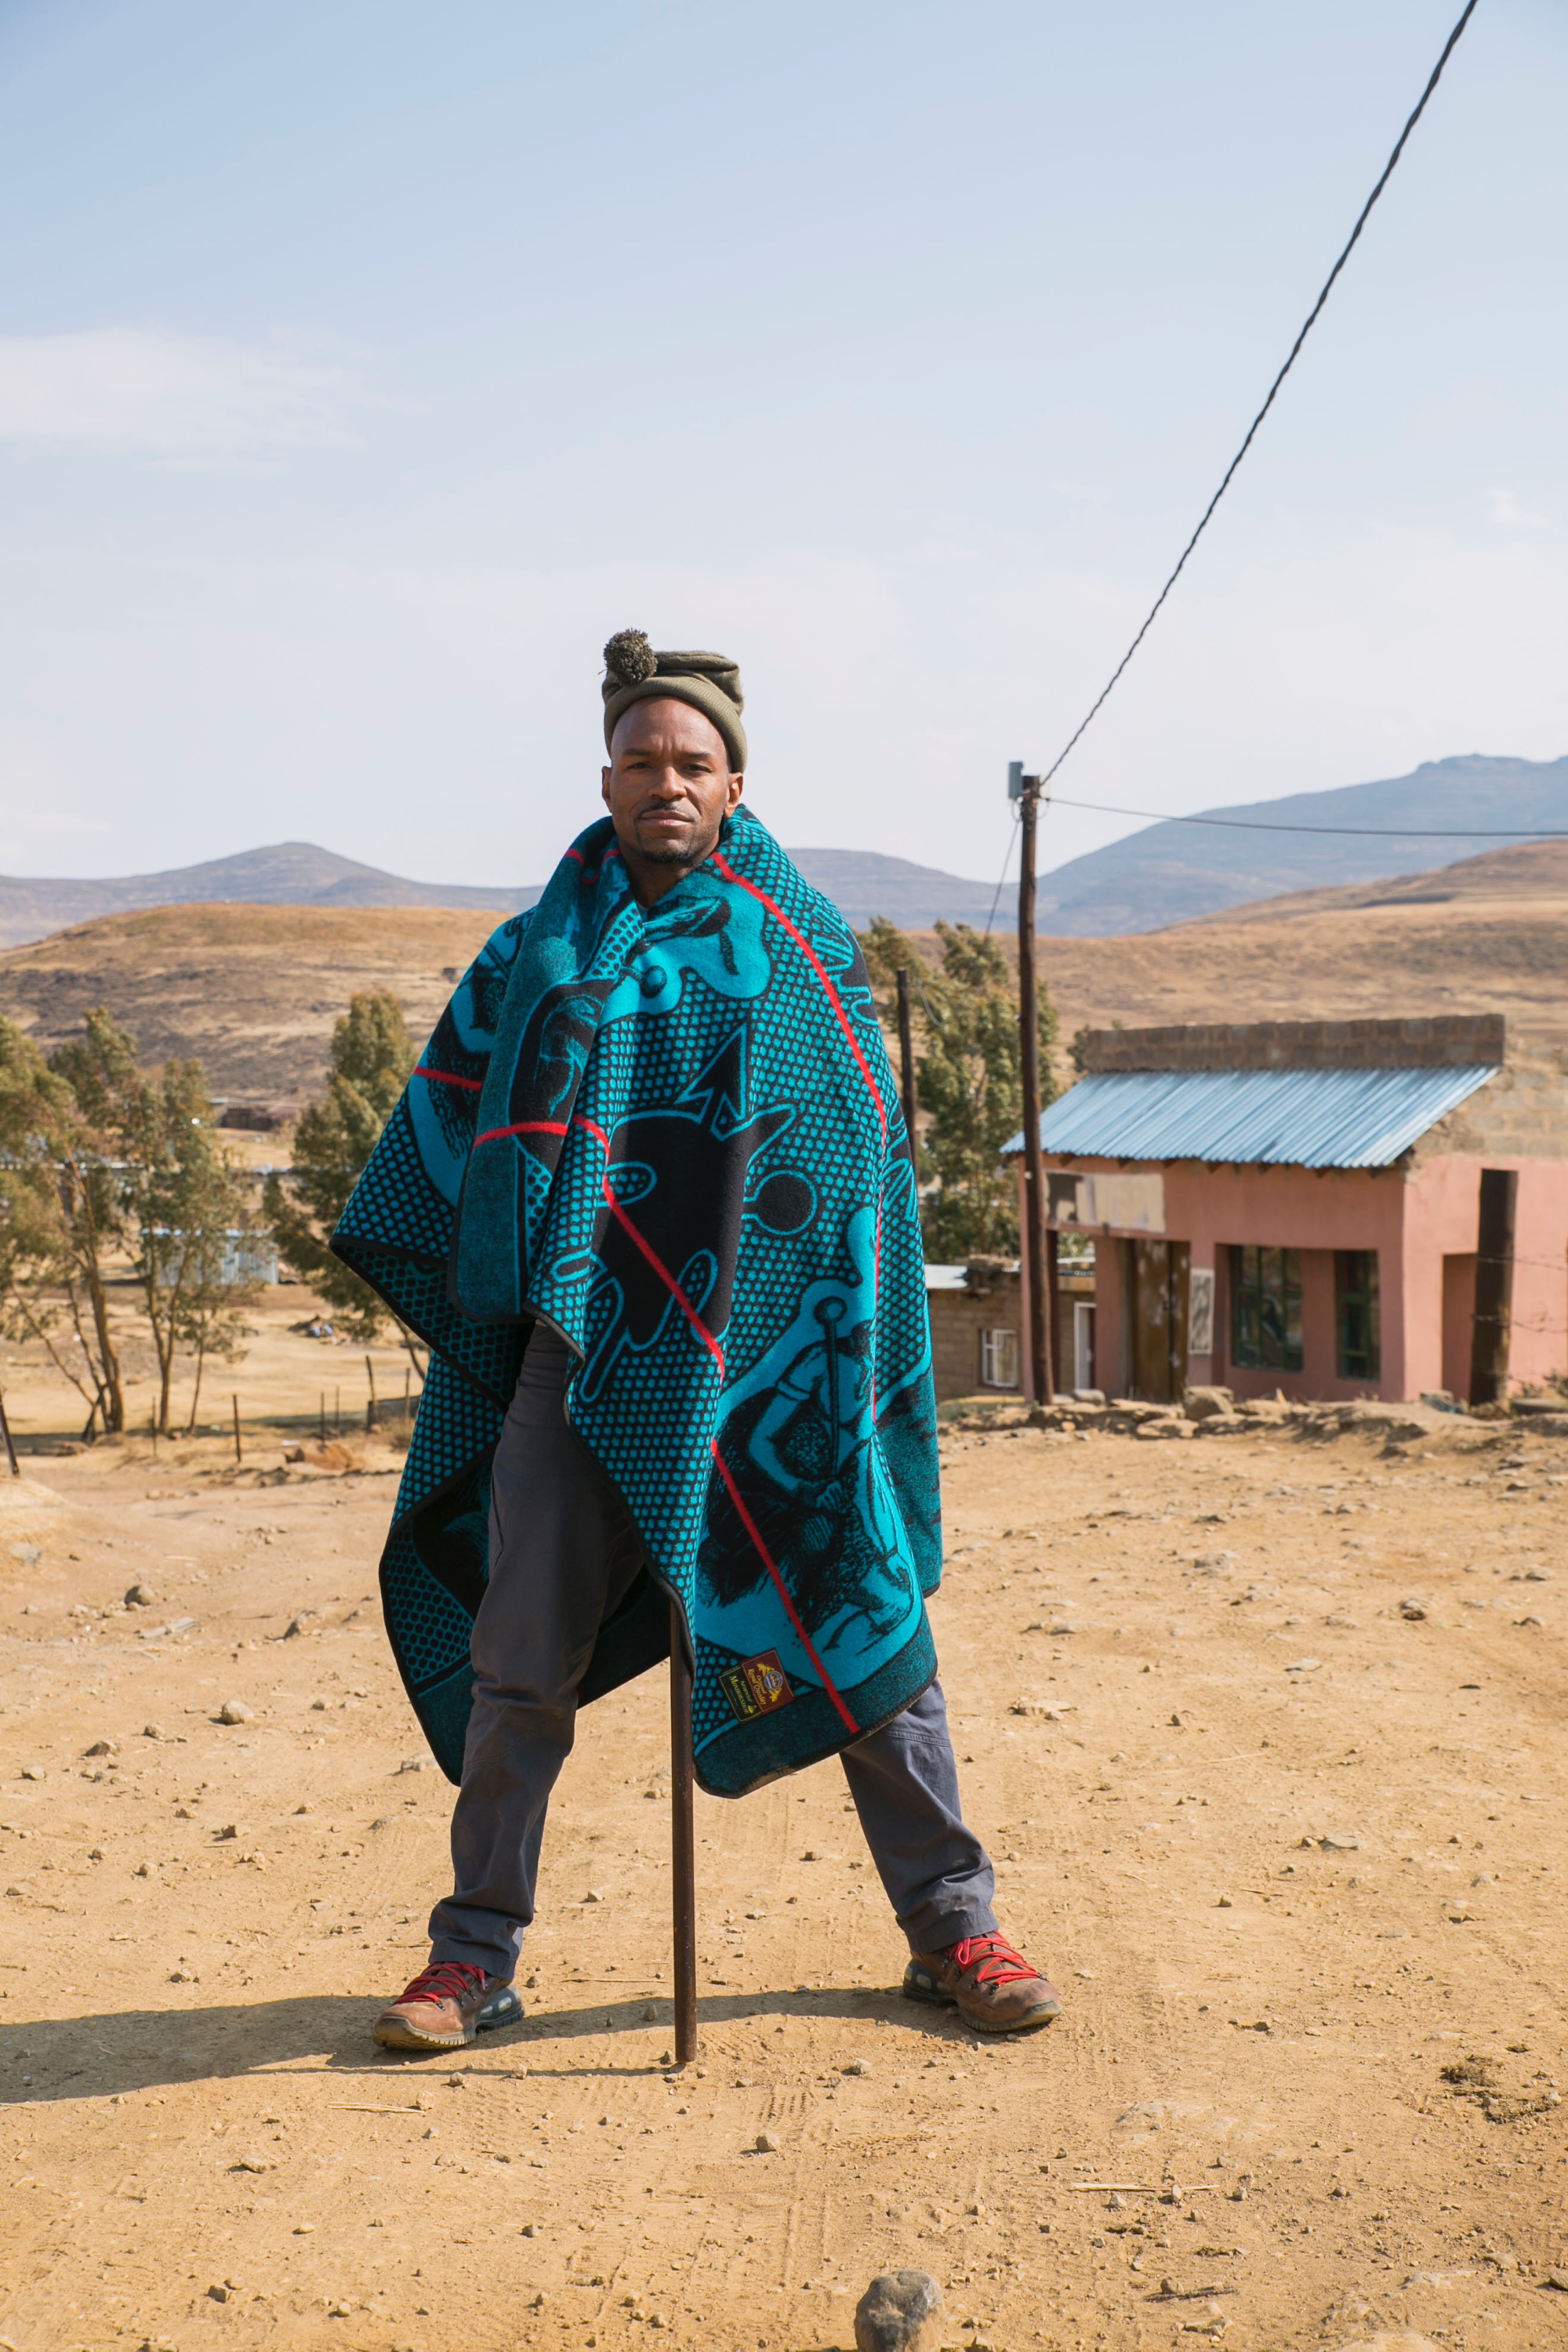 Meet The Fearless Traveler Risking His Life For Adventure In Africa